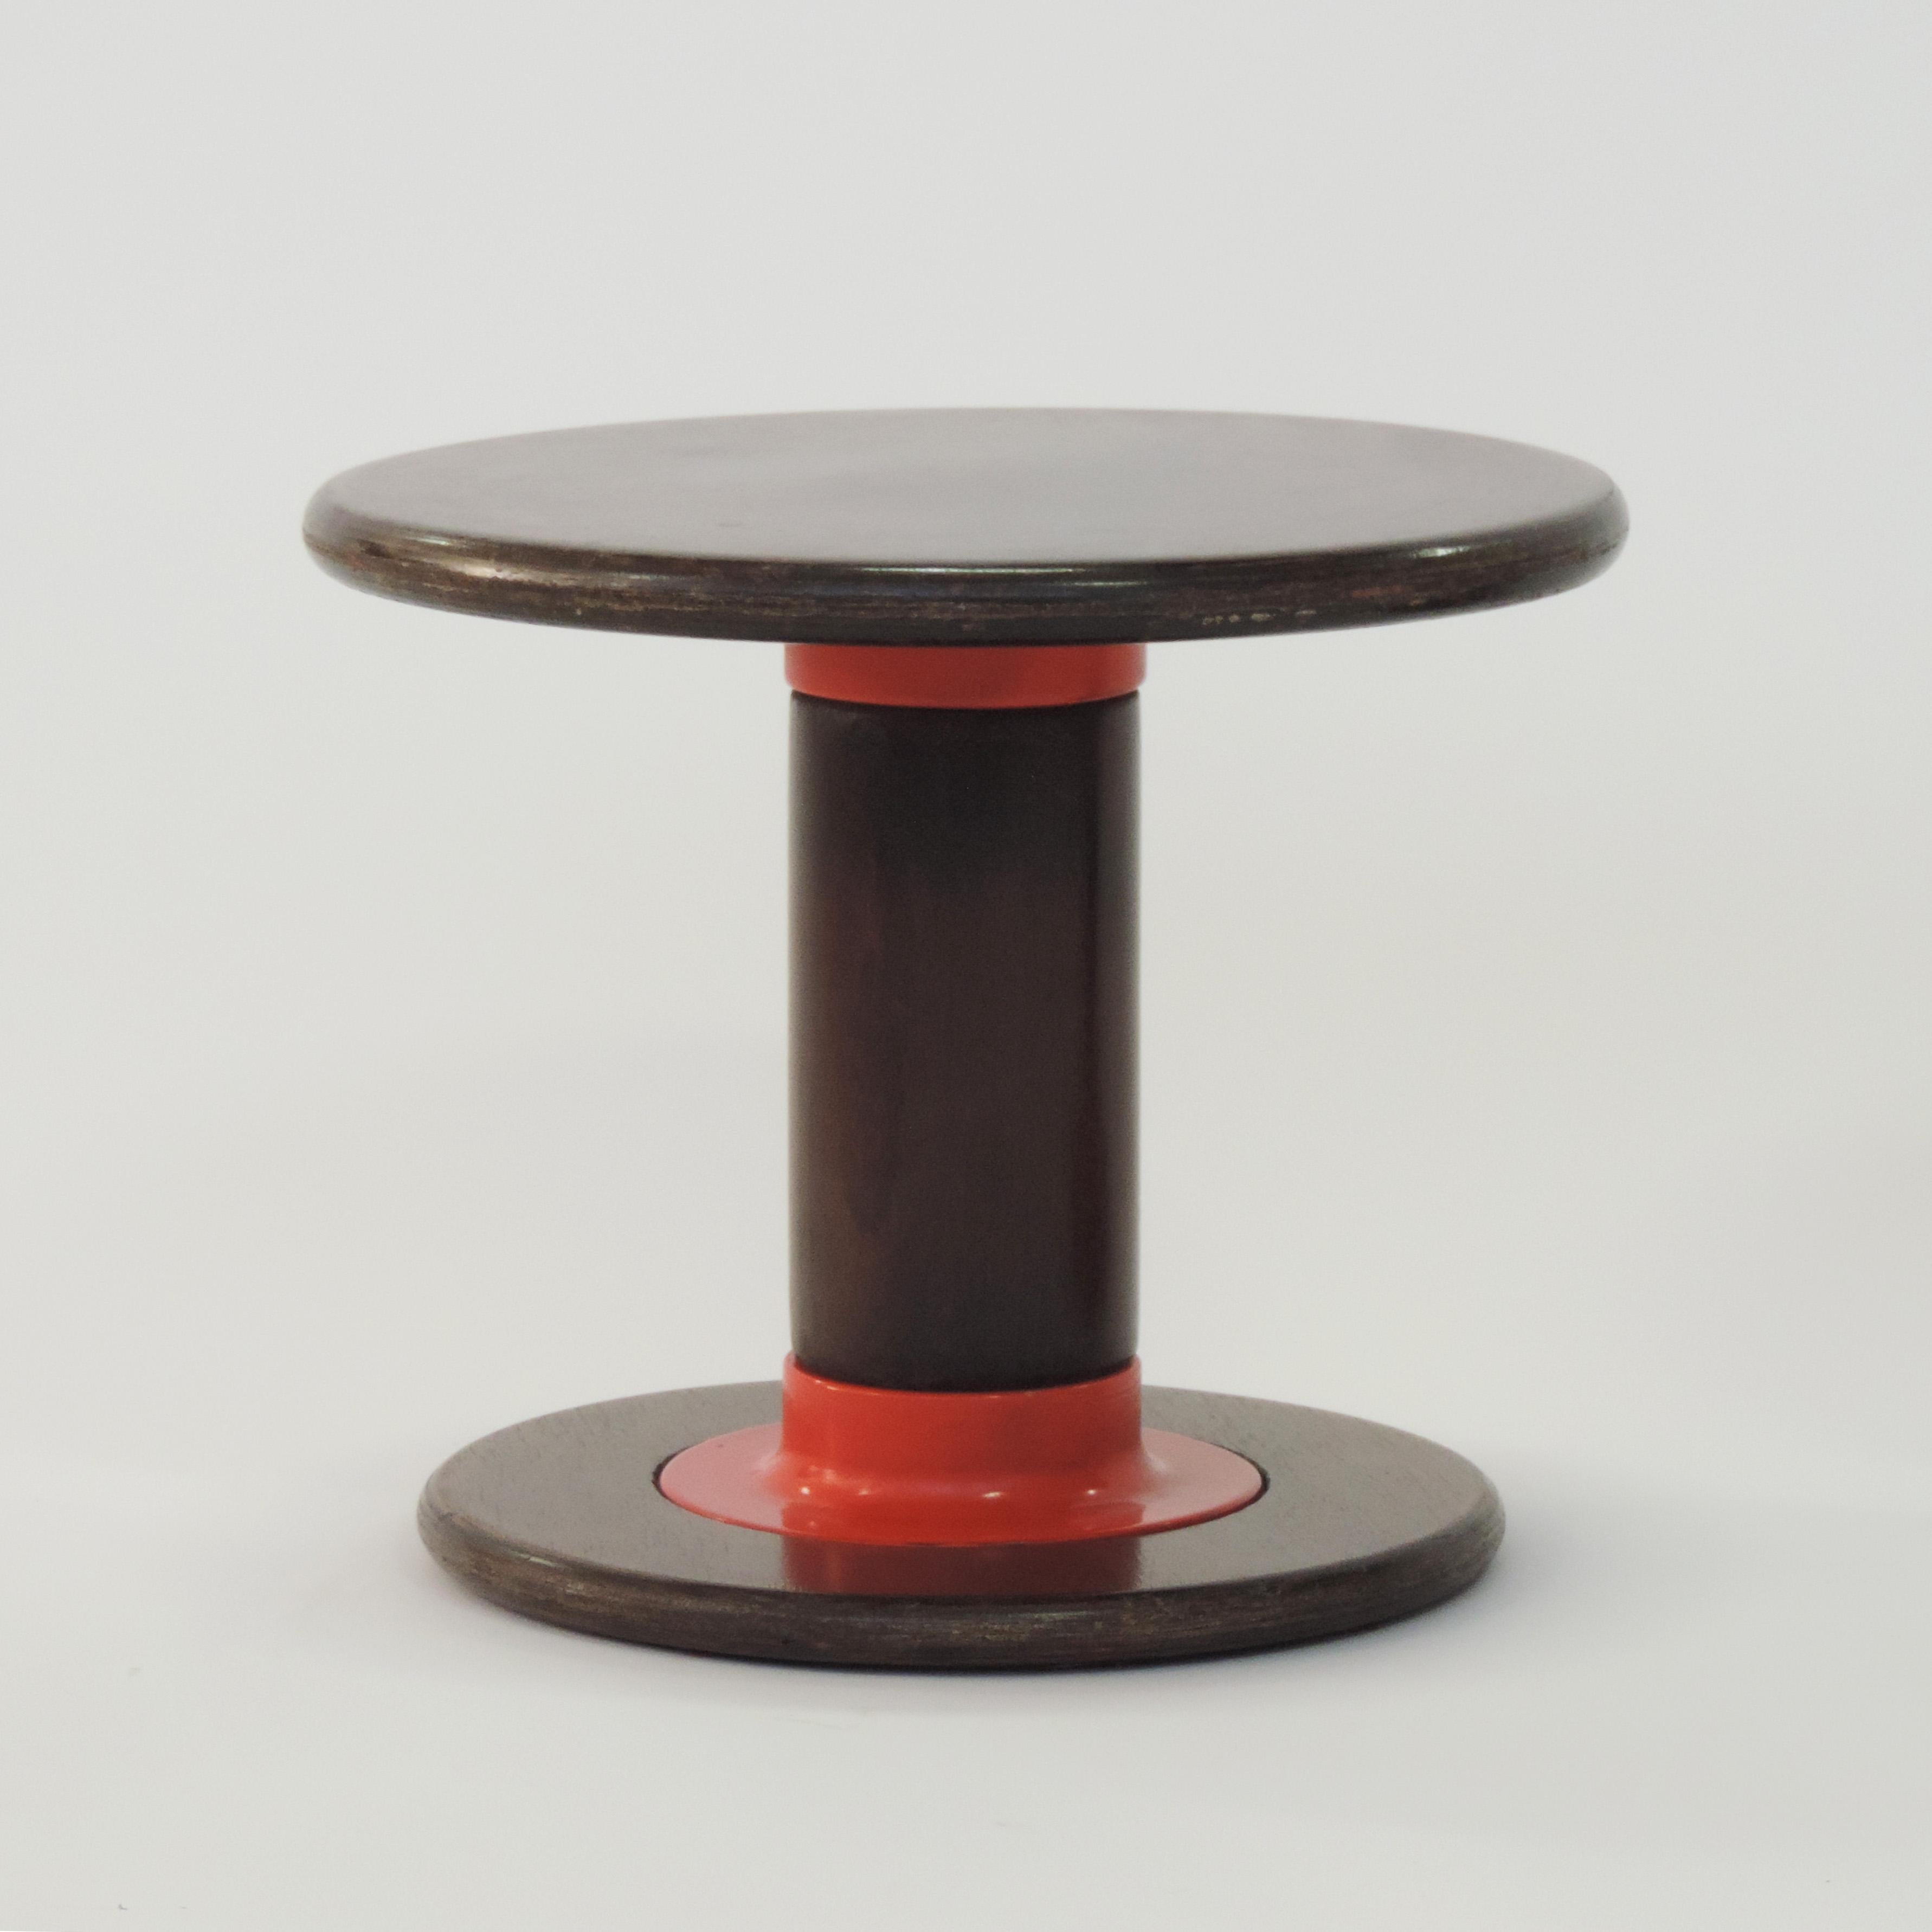 Mid-20th Century Ettore Sottsass Jr. Pair of Rocchettone Side Tables for Poltronova, Italy, 1964